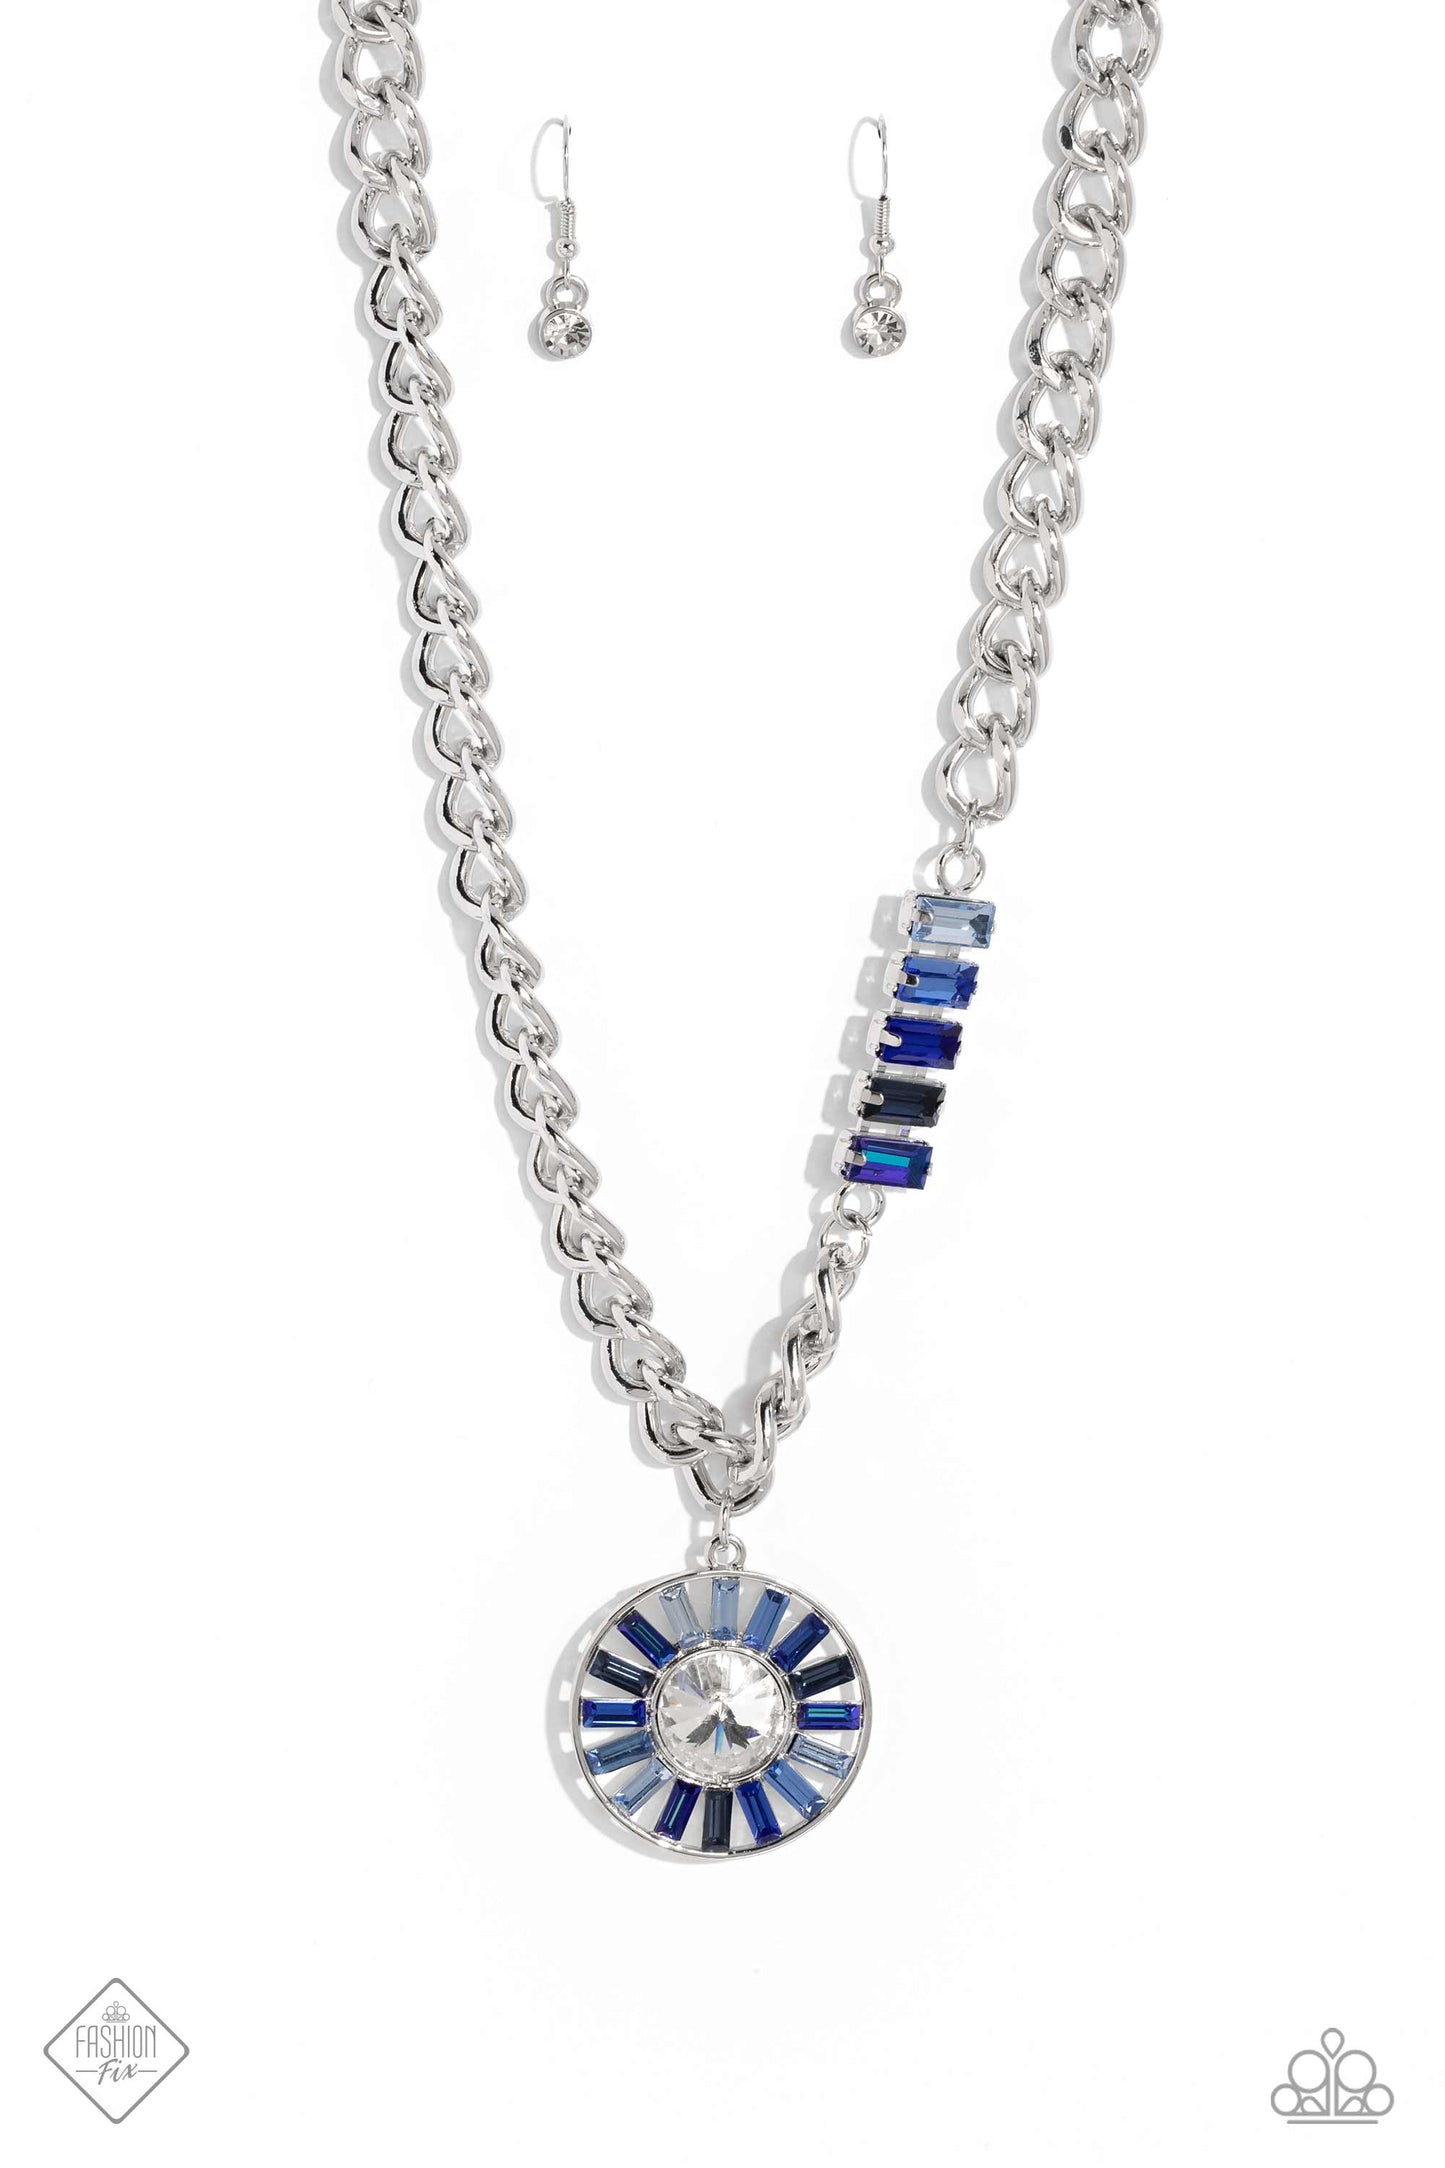 Tiered Talent - Blue and Silver Necklace - Paparazzi Accessories - An exaggerated white gem is encircled by a collection of emerald-cut gems in varying shades of blue, creating a hypnotic pendant that swings from a thick silver curb chain. Five additional emerald-cut gems in the same tranquil spectrum of blue climb one side of the neckline, adding an unexpected splash of color to the bold design.